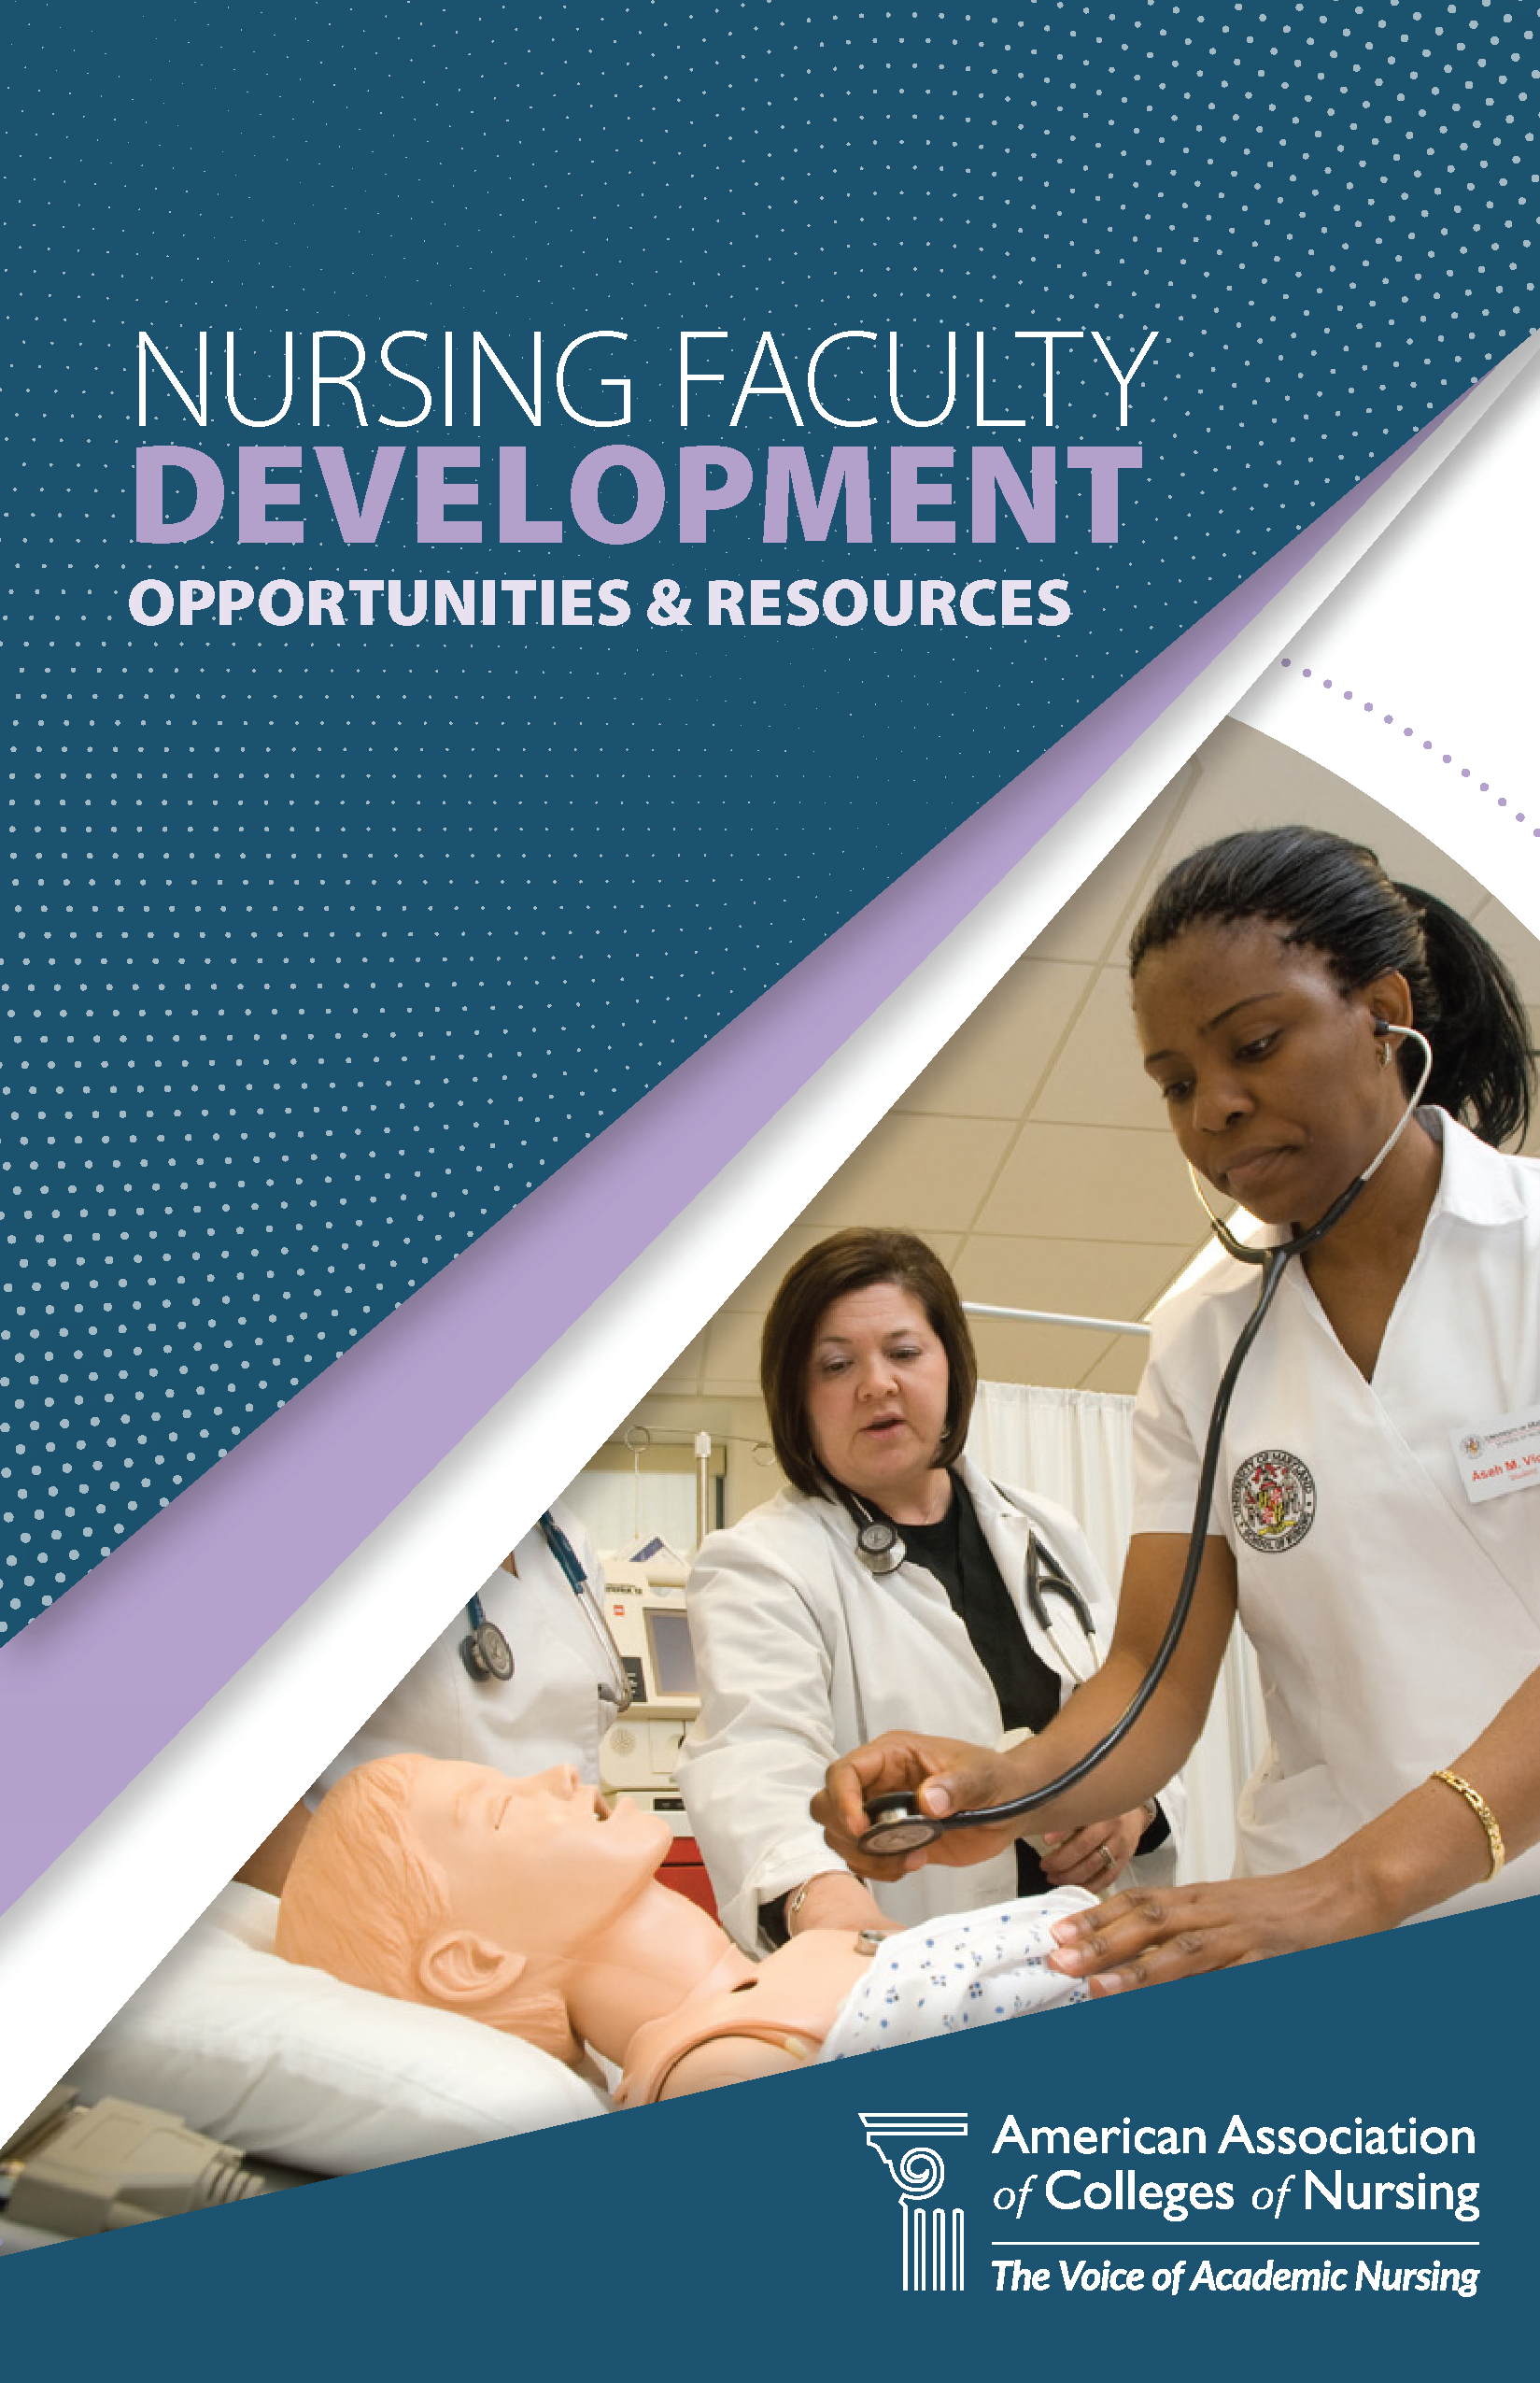 Nursing Faculty Development: Opportunities & Resources | American Association of Colleges of Nursing, the Voice of Academic Nursing.